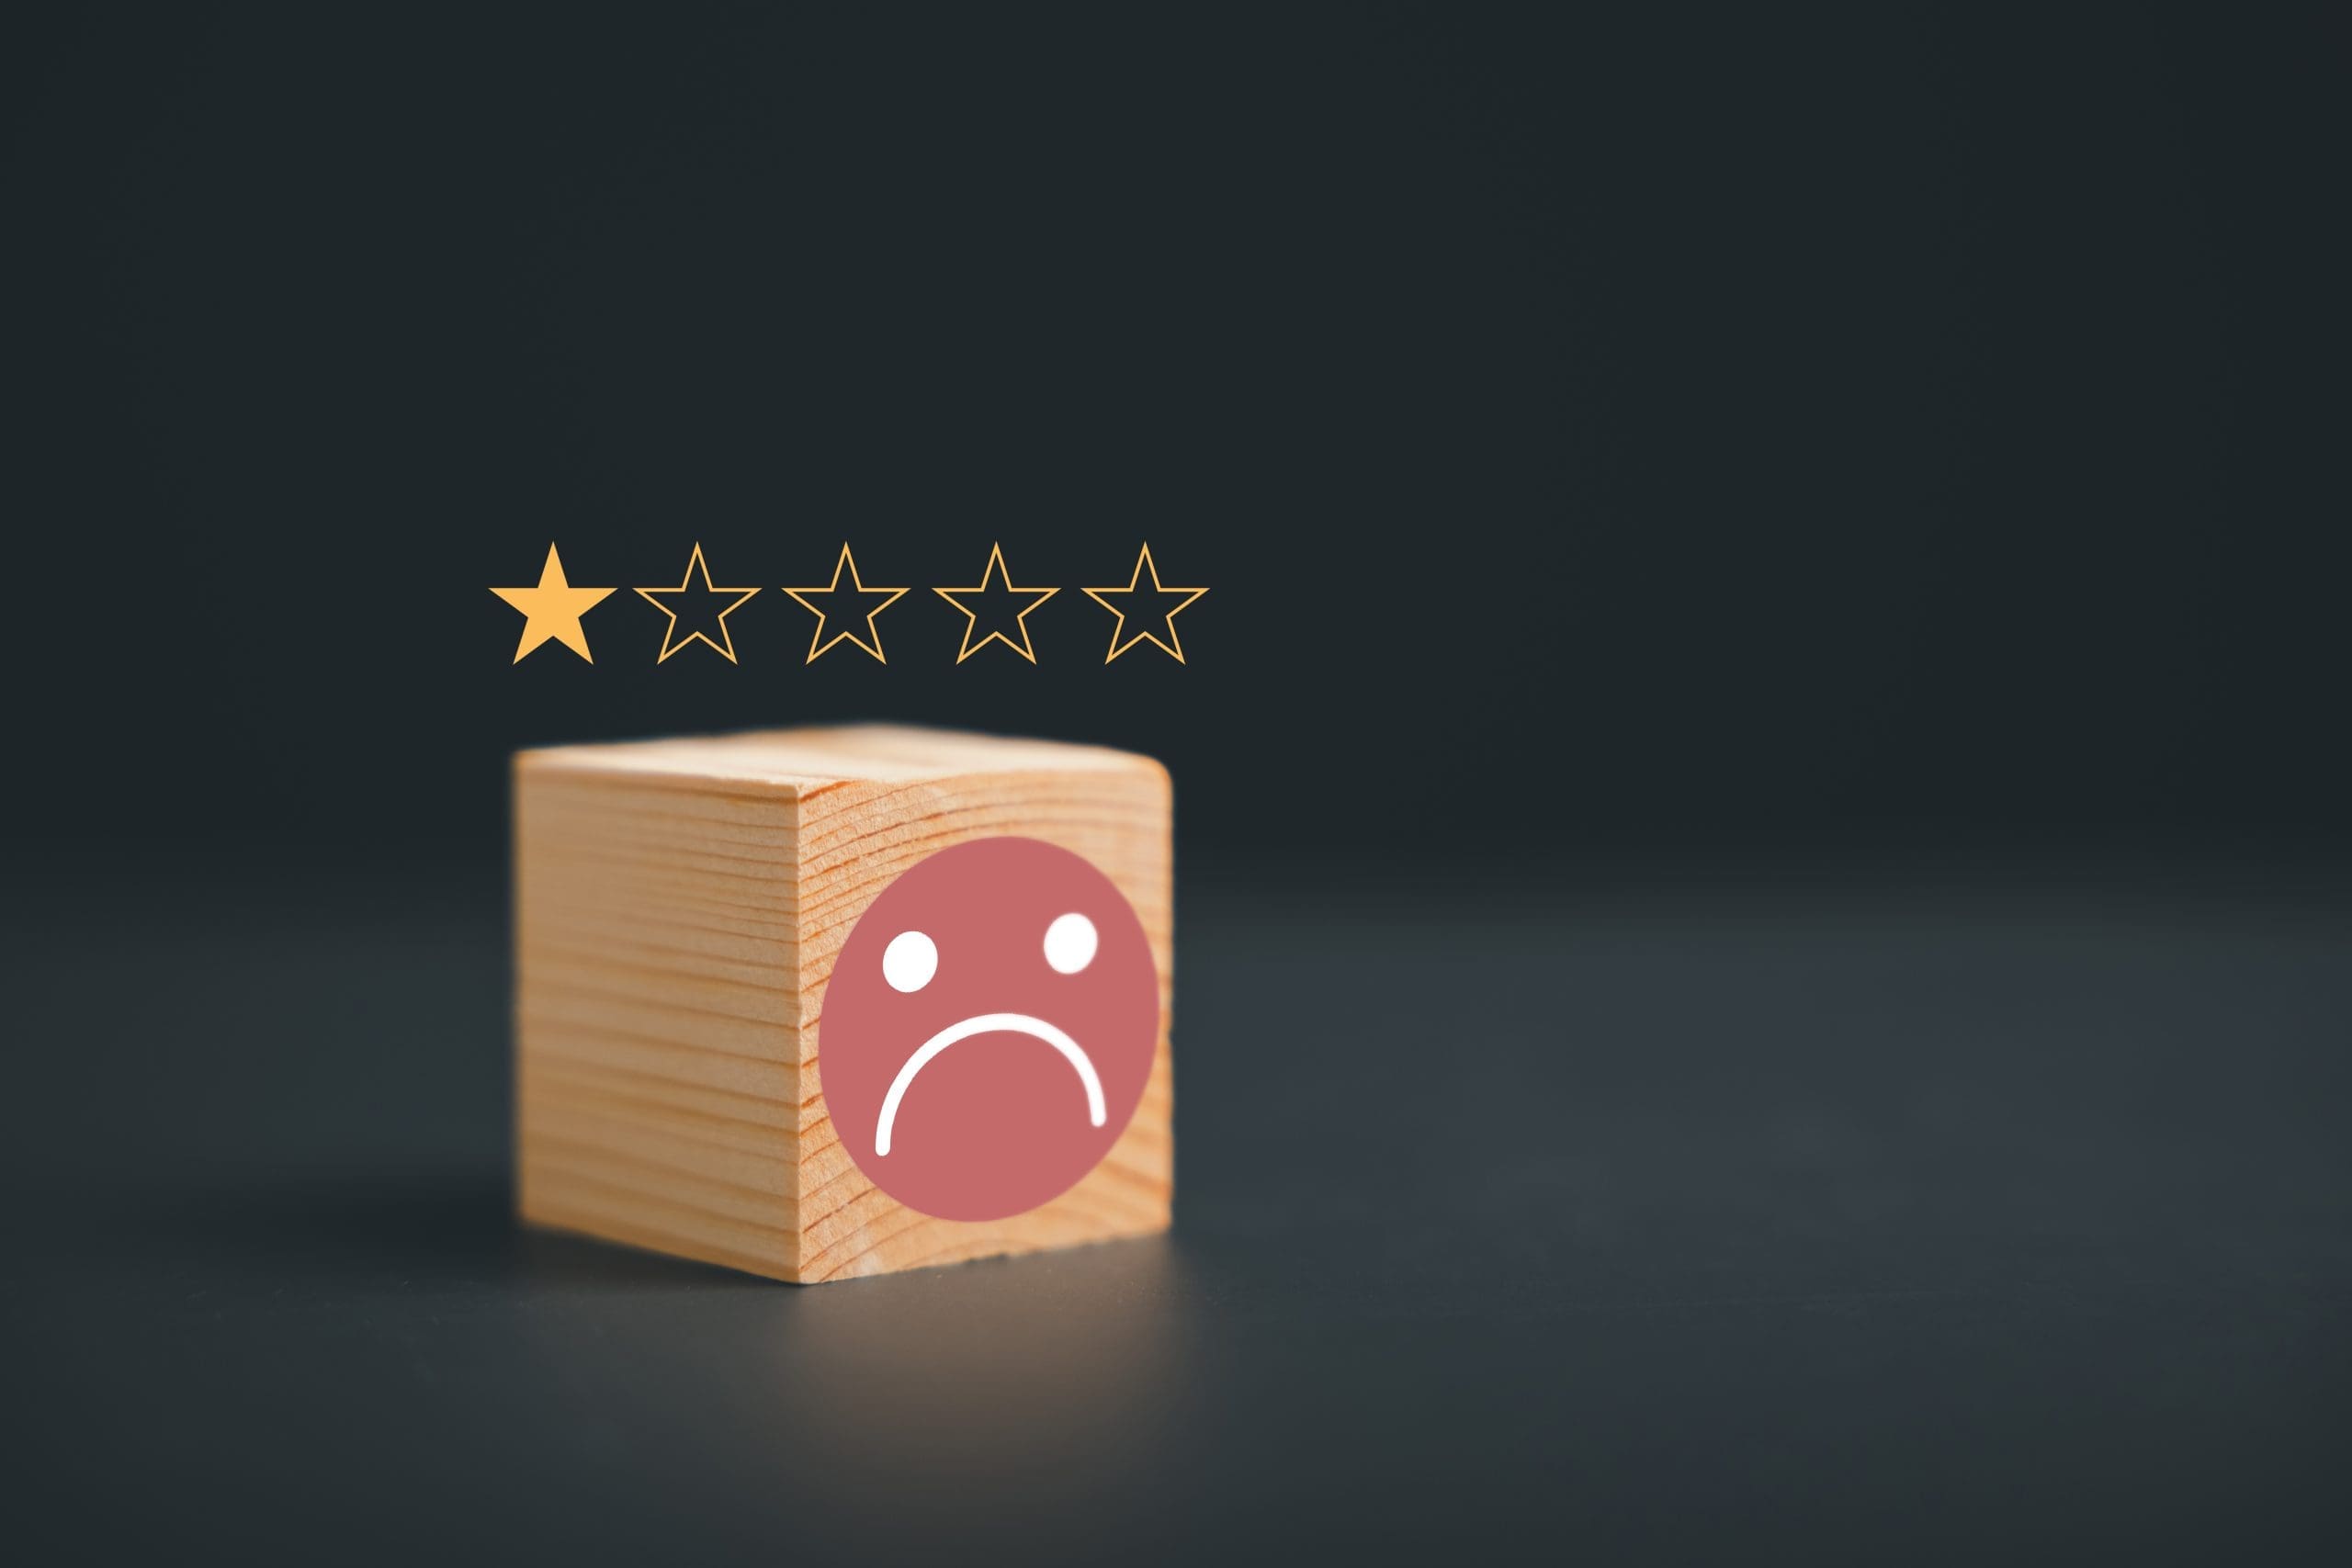 A wooden cube with a sad face and stars on it.